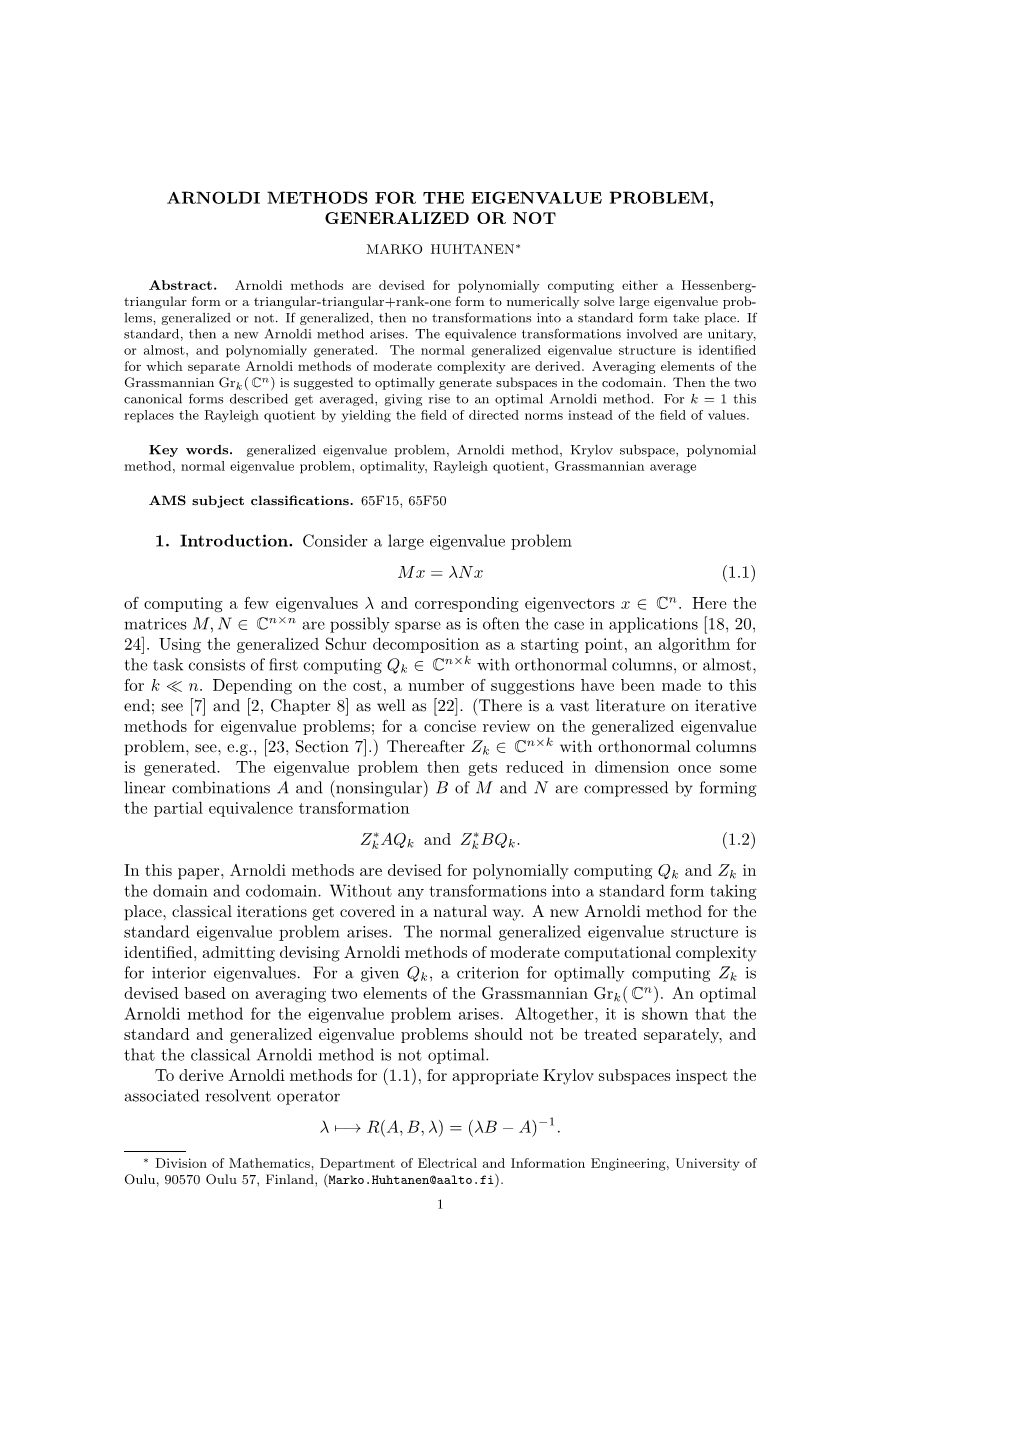 Arnoldi Methods for the Eigenvalue Problem, Generalized Or Not